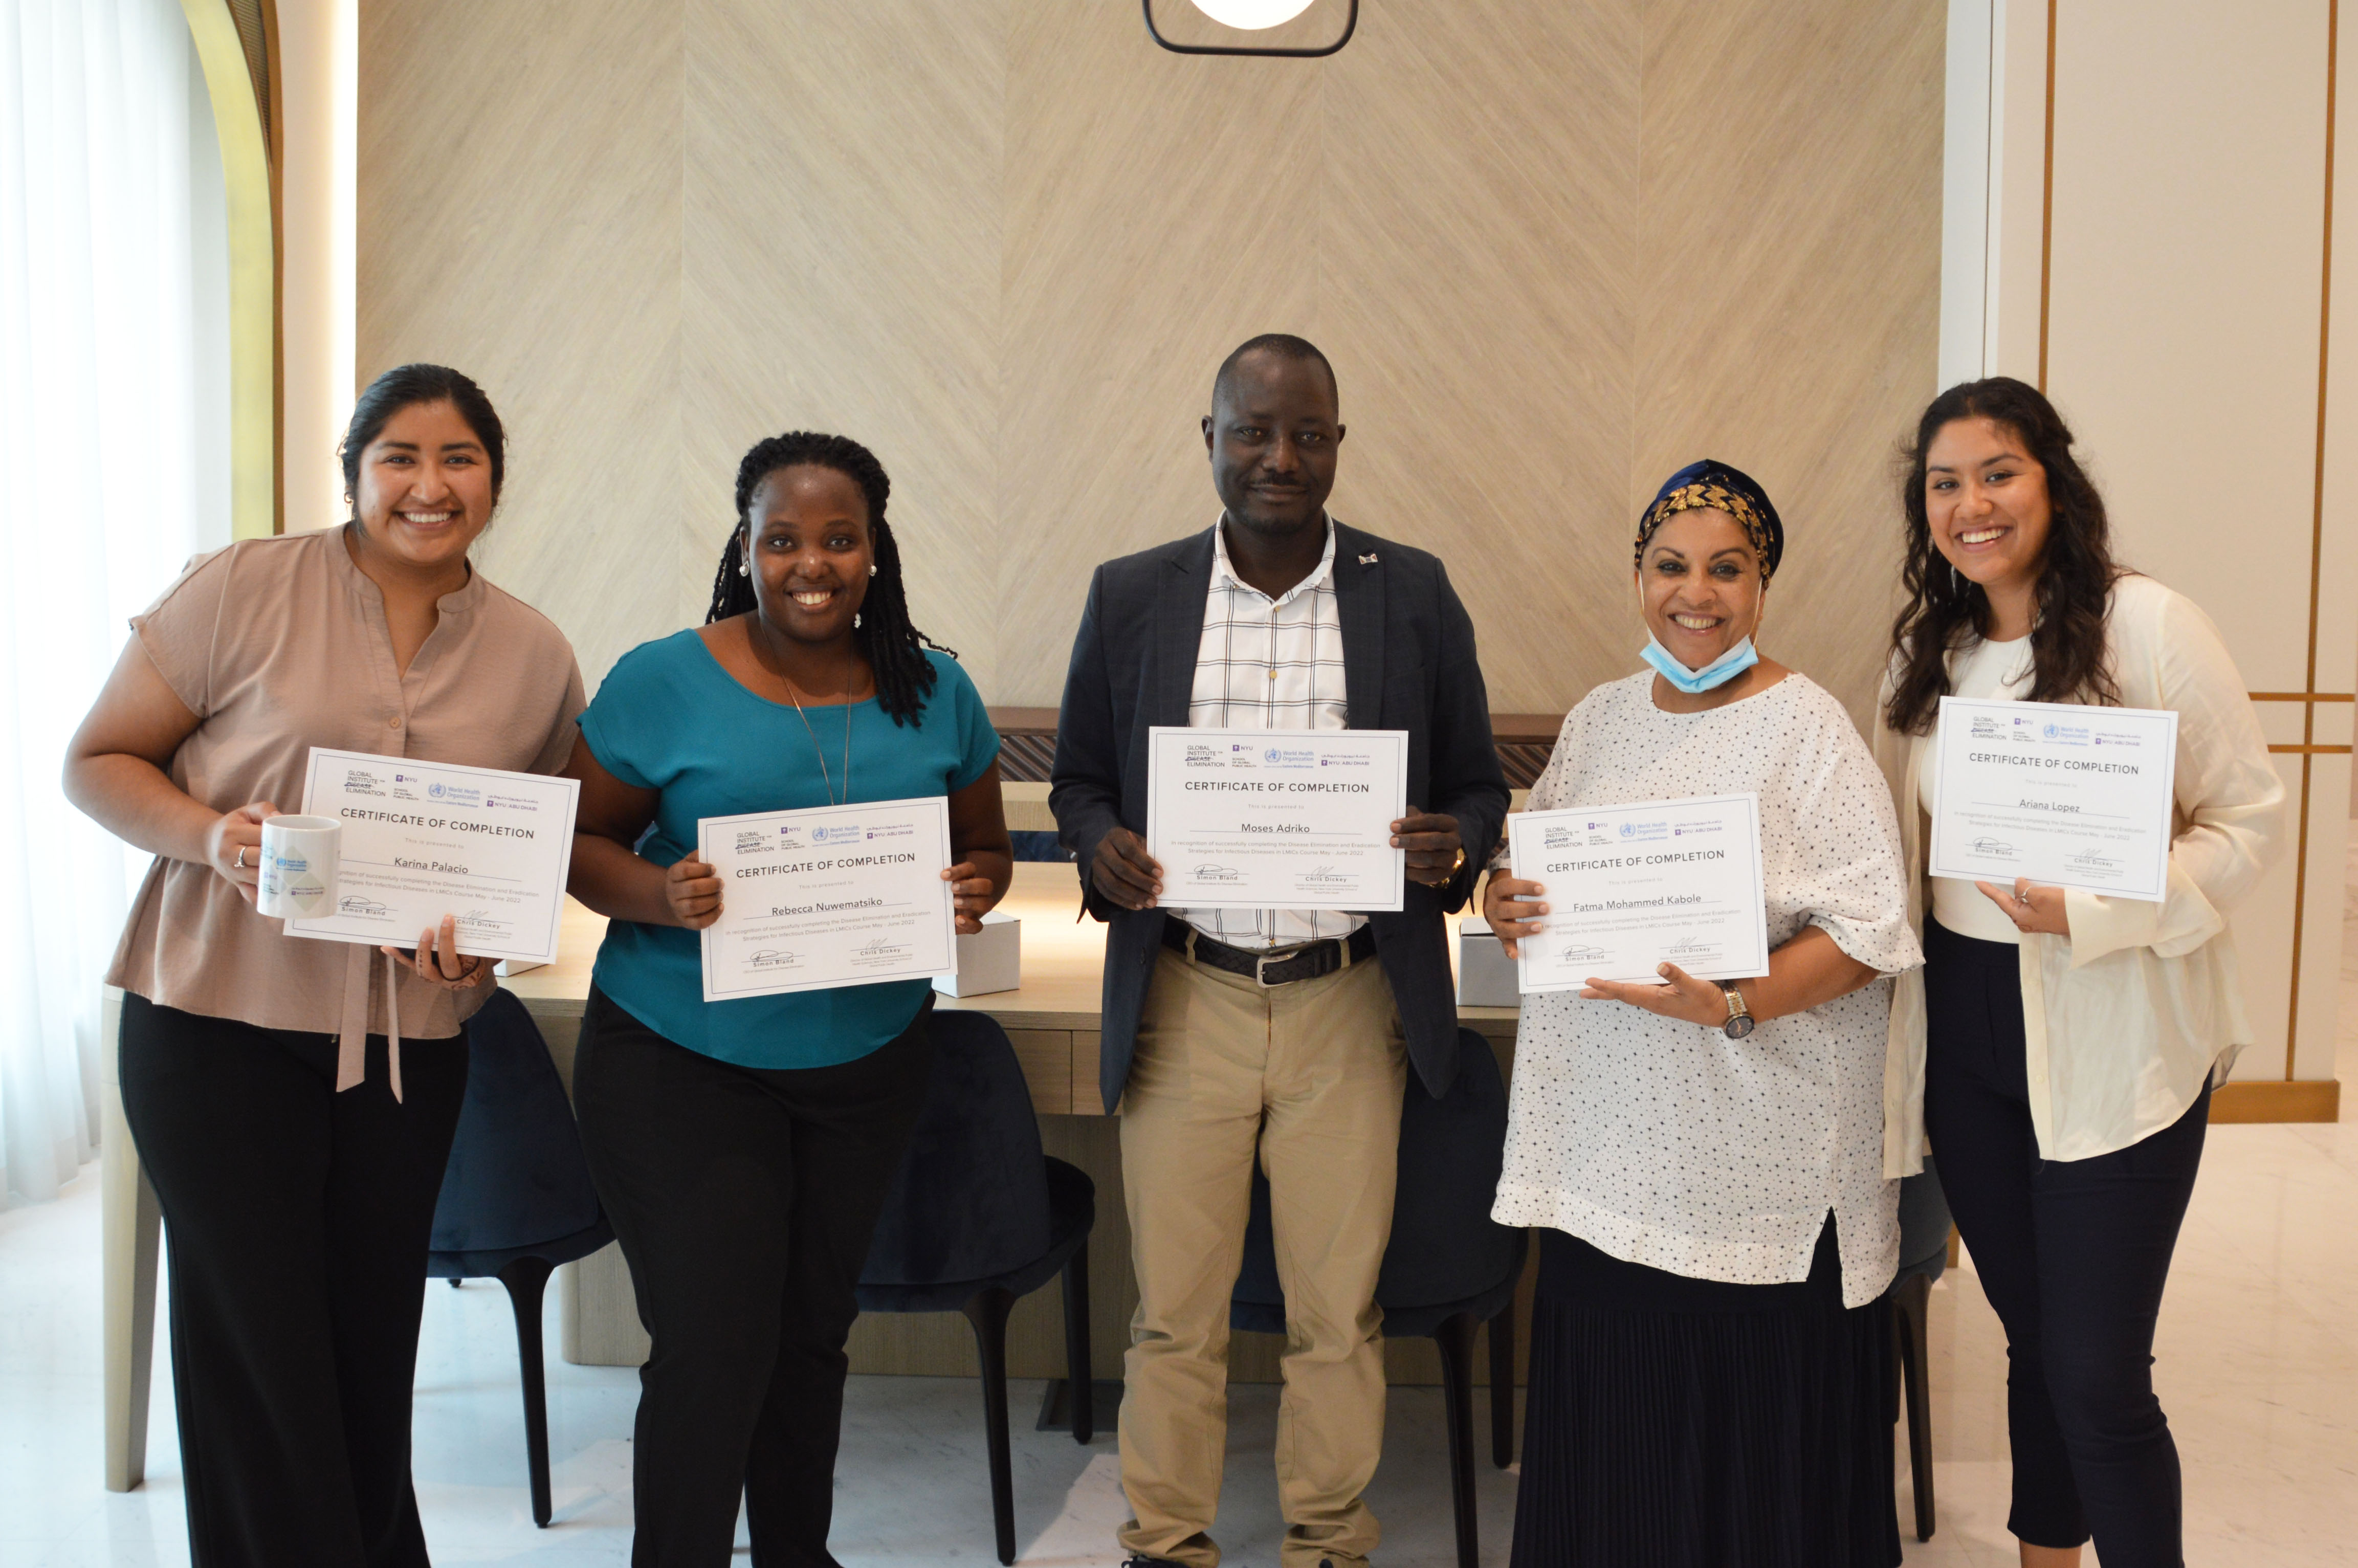 Disease Elimination and Eradication Strategies for Infectious Diseases in LMICs Course winning team